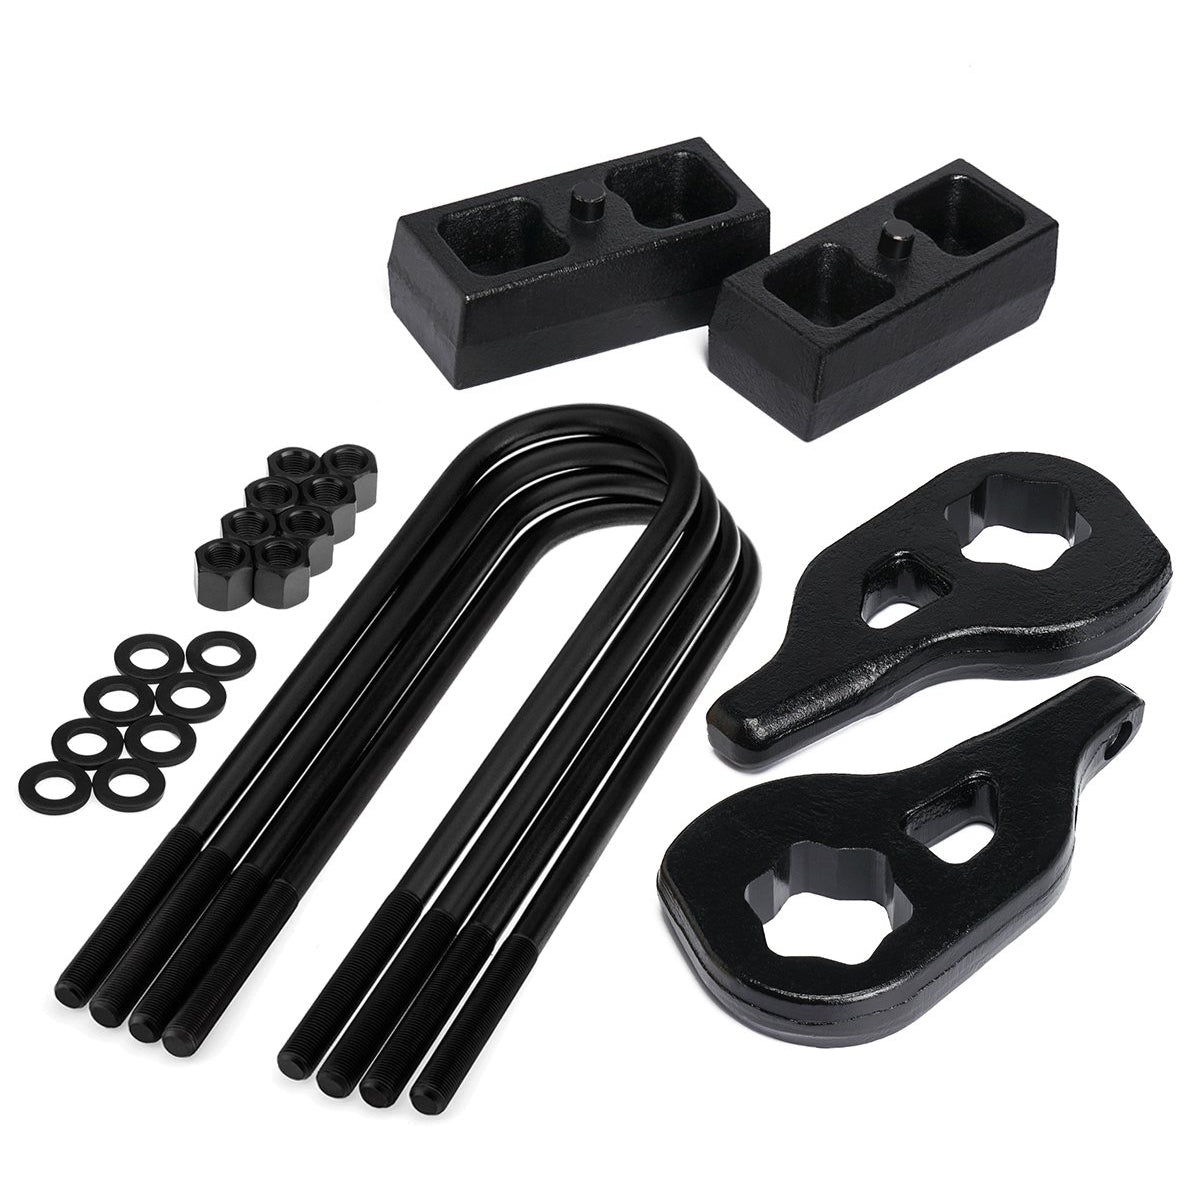 2002-2005 Dodge Ram 1500 Full Lift Kit with Shock Extensions and Torsion Key Unloading/Removal Tool